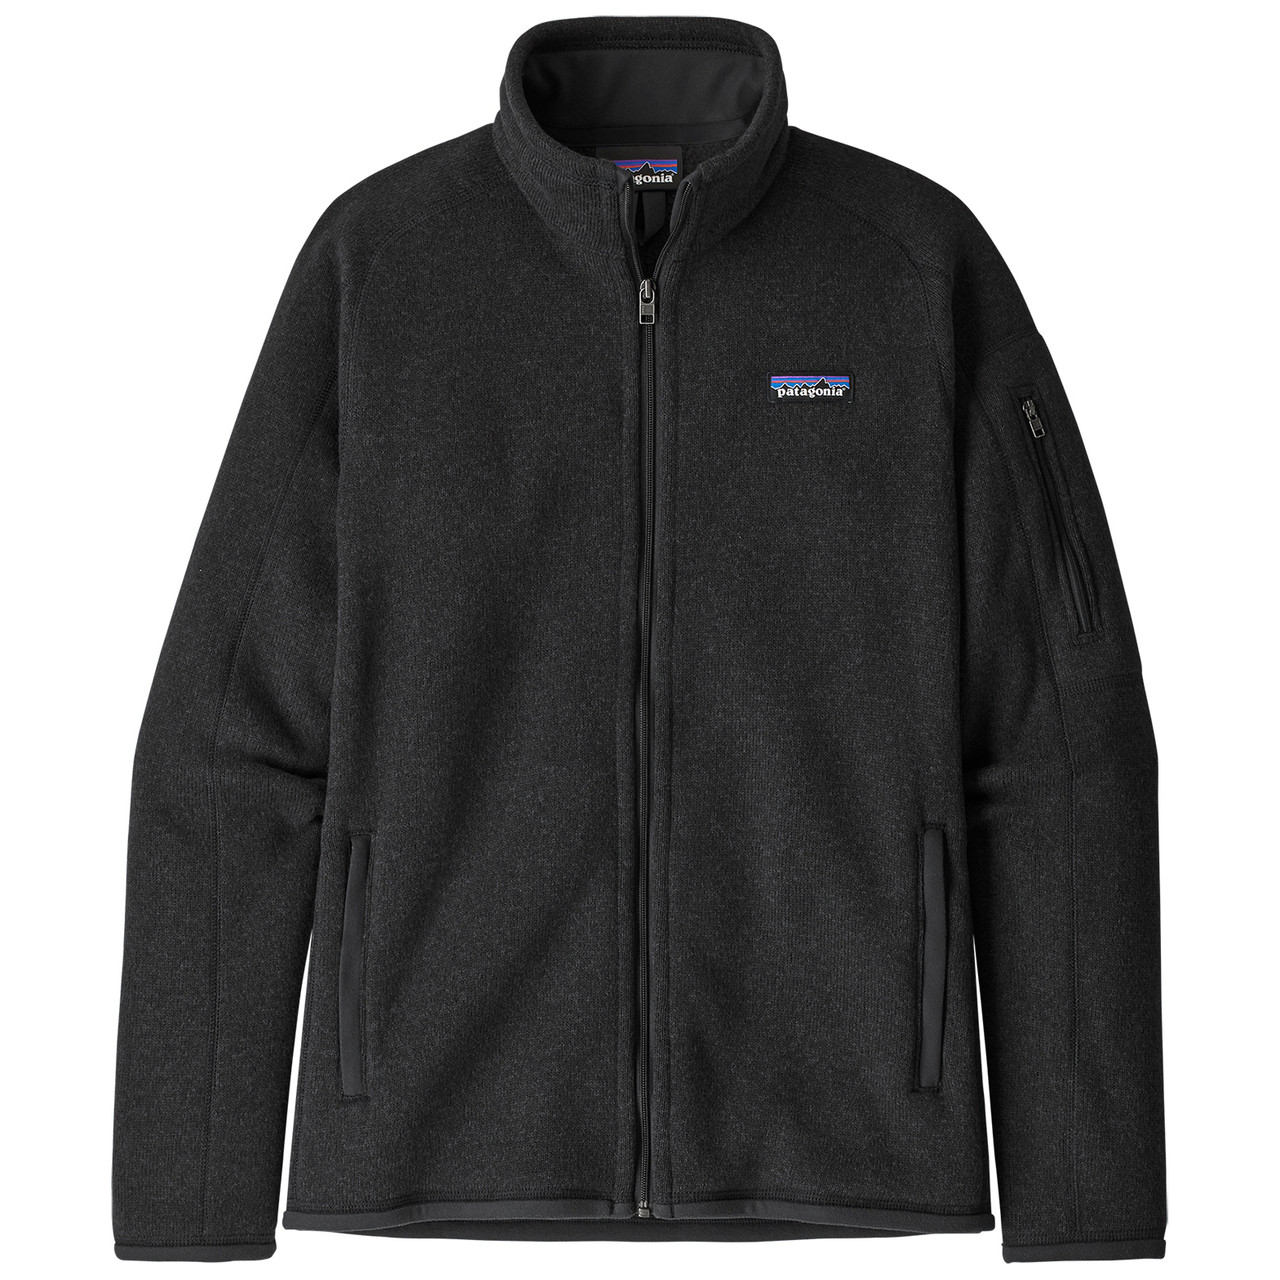 Patagonia W's Better Sweater Jacket - Sequoia Red - Small